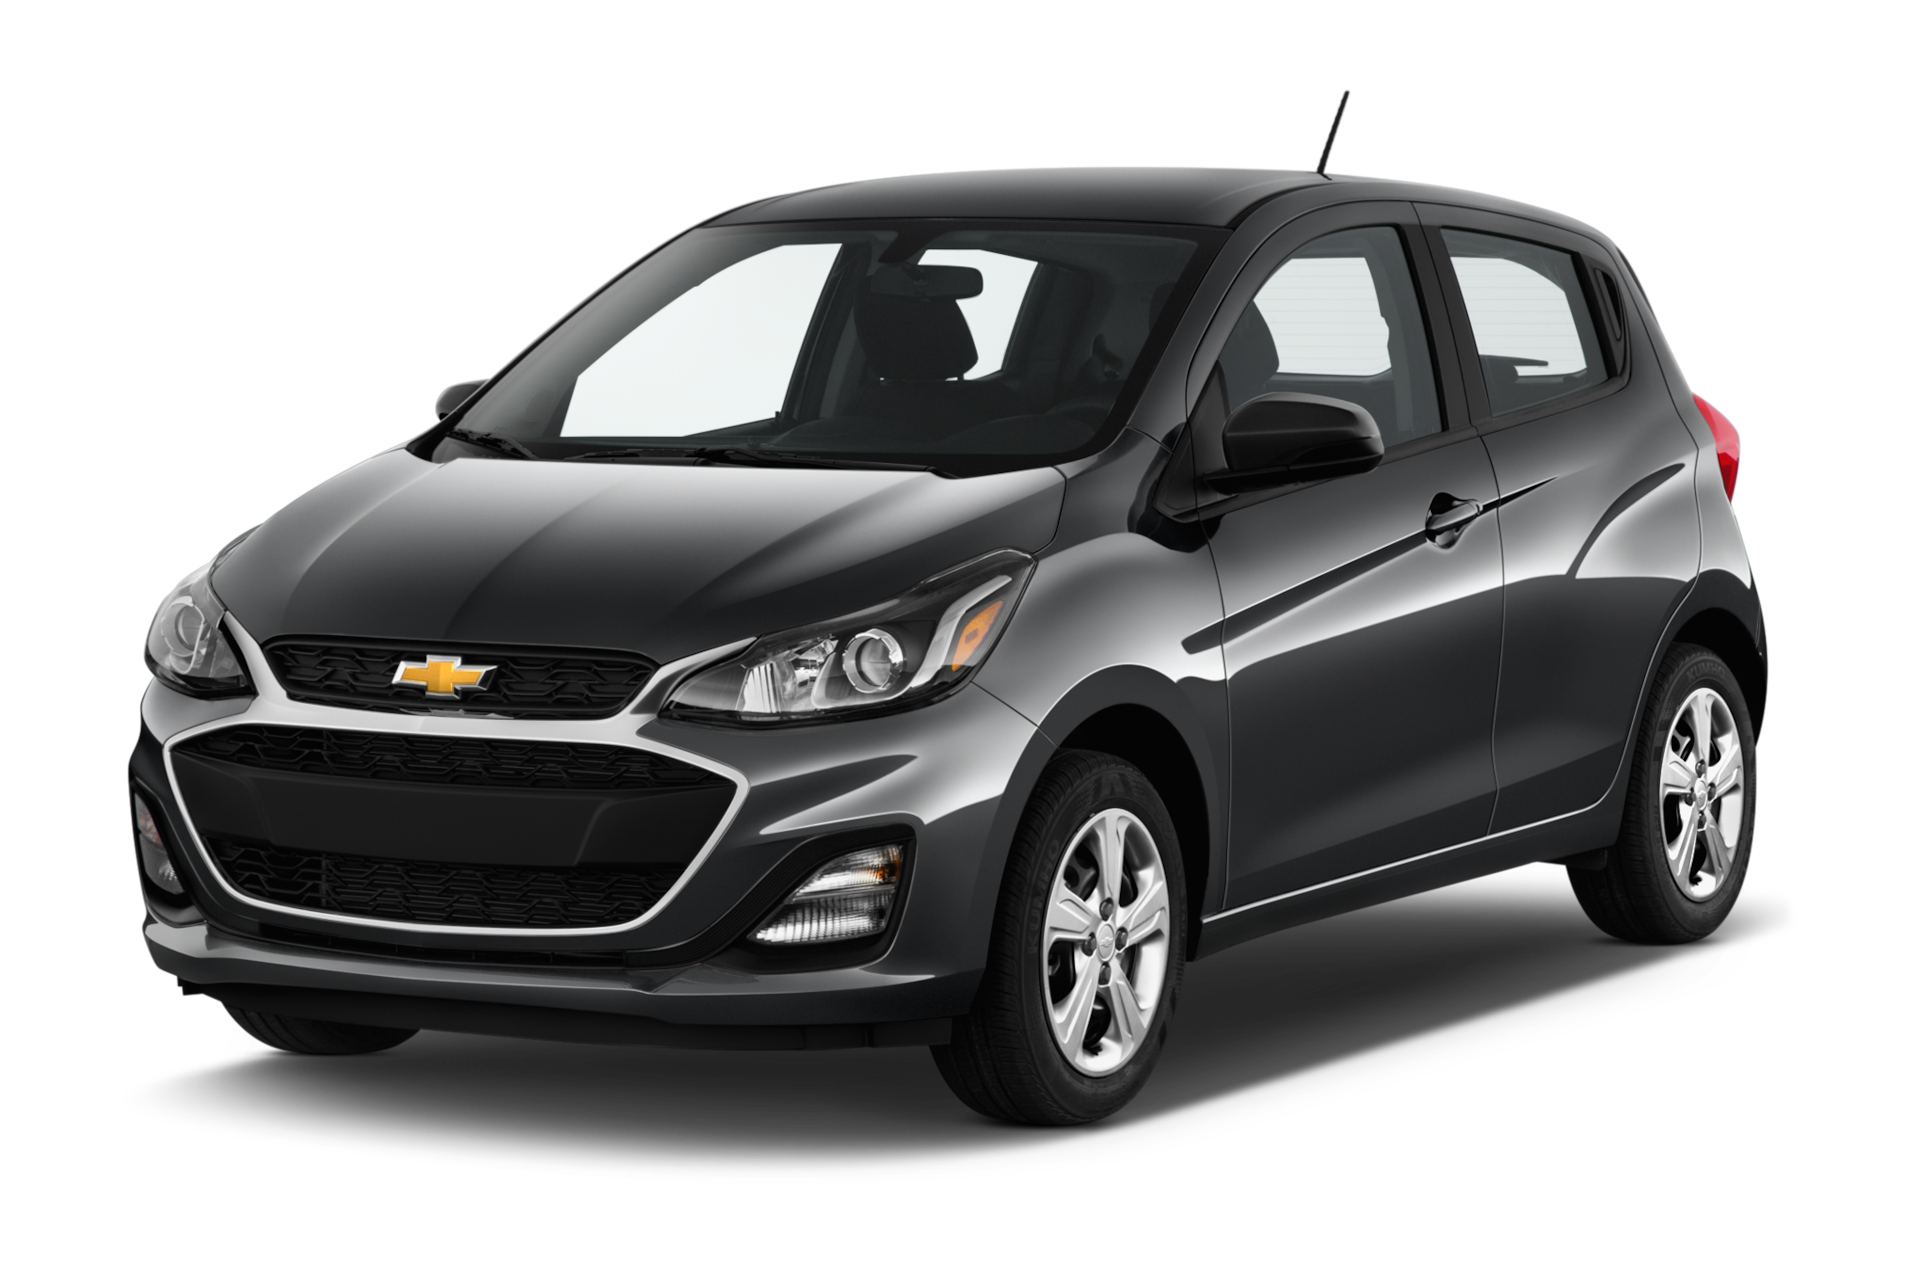 2019 Chevrolet Spark Prices, Reviews, and Photos - MotorTrend